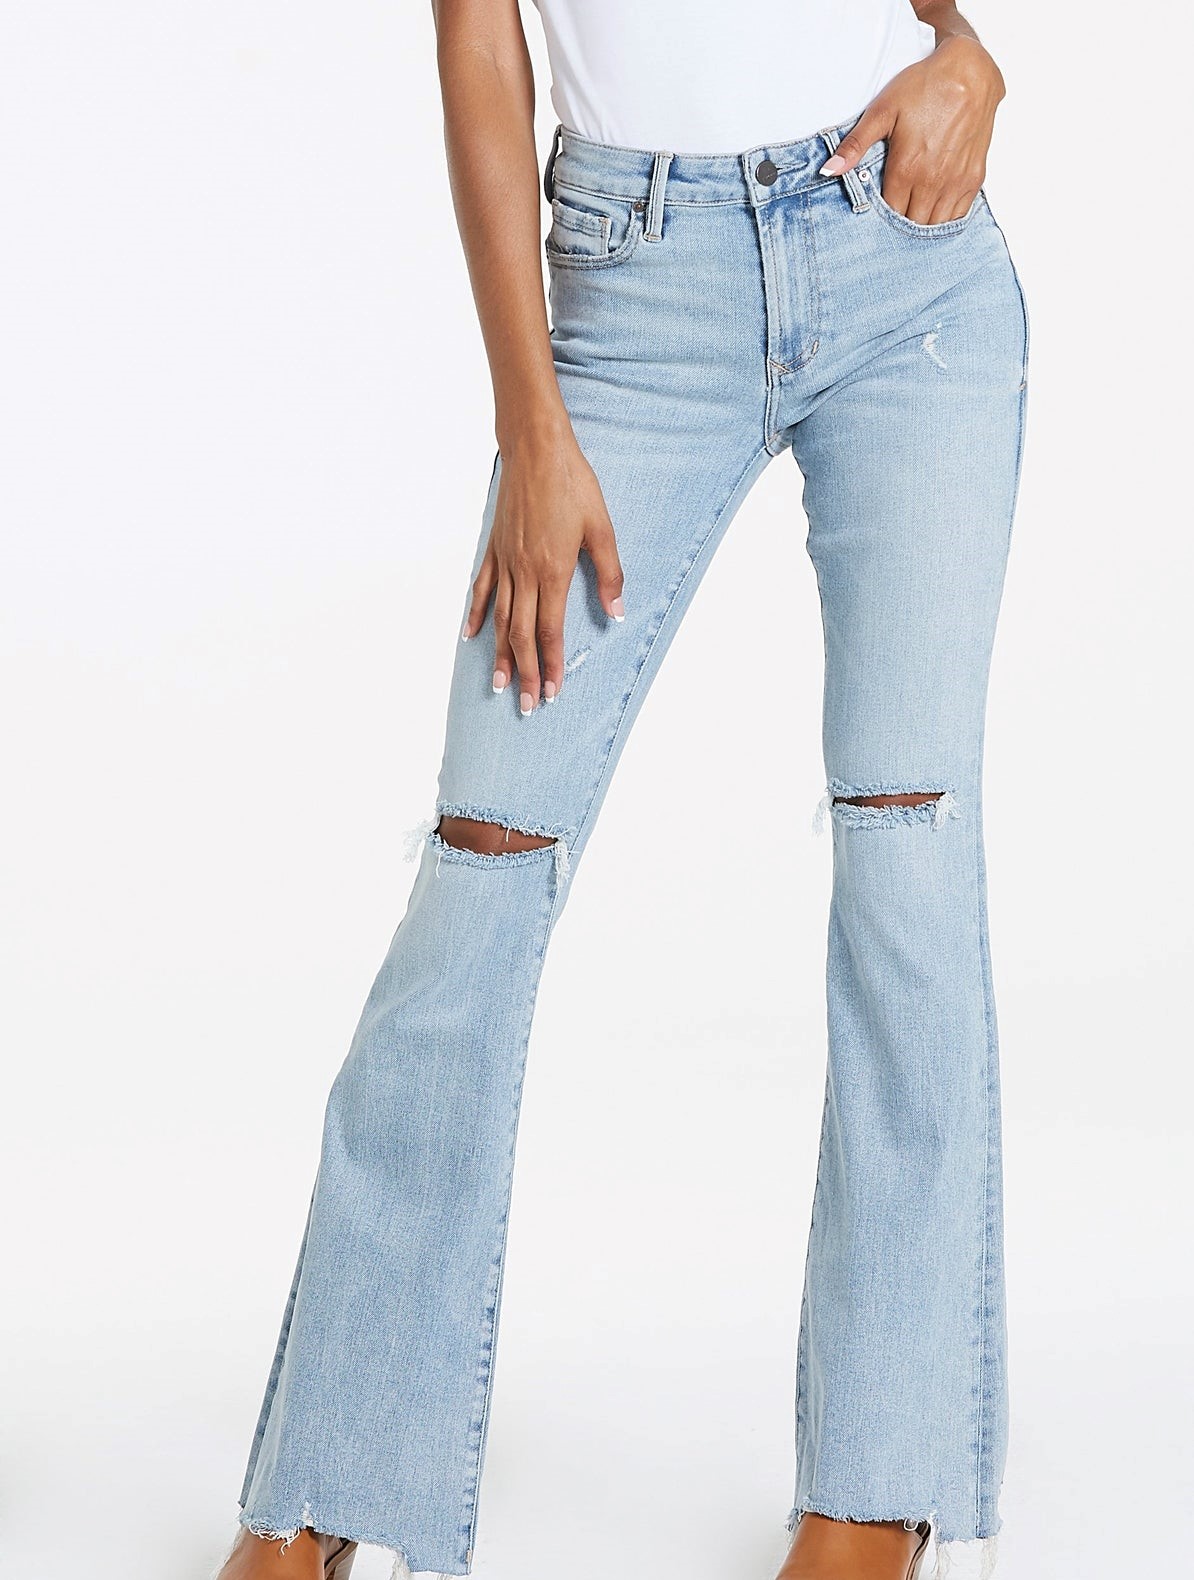 Rosa High Rise Flare Beyond Jeans by Dear John - Frontier Justice